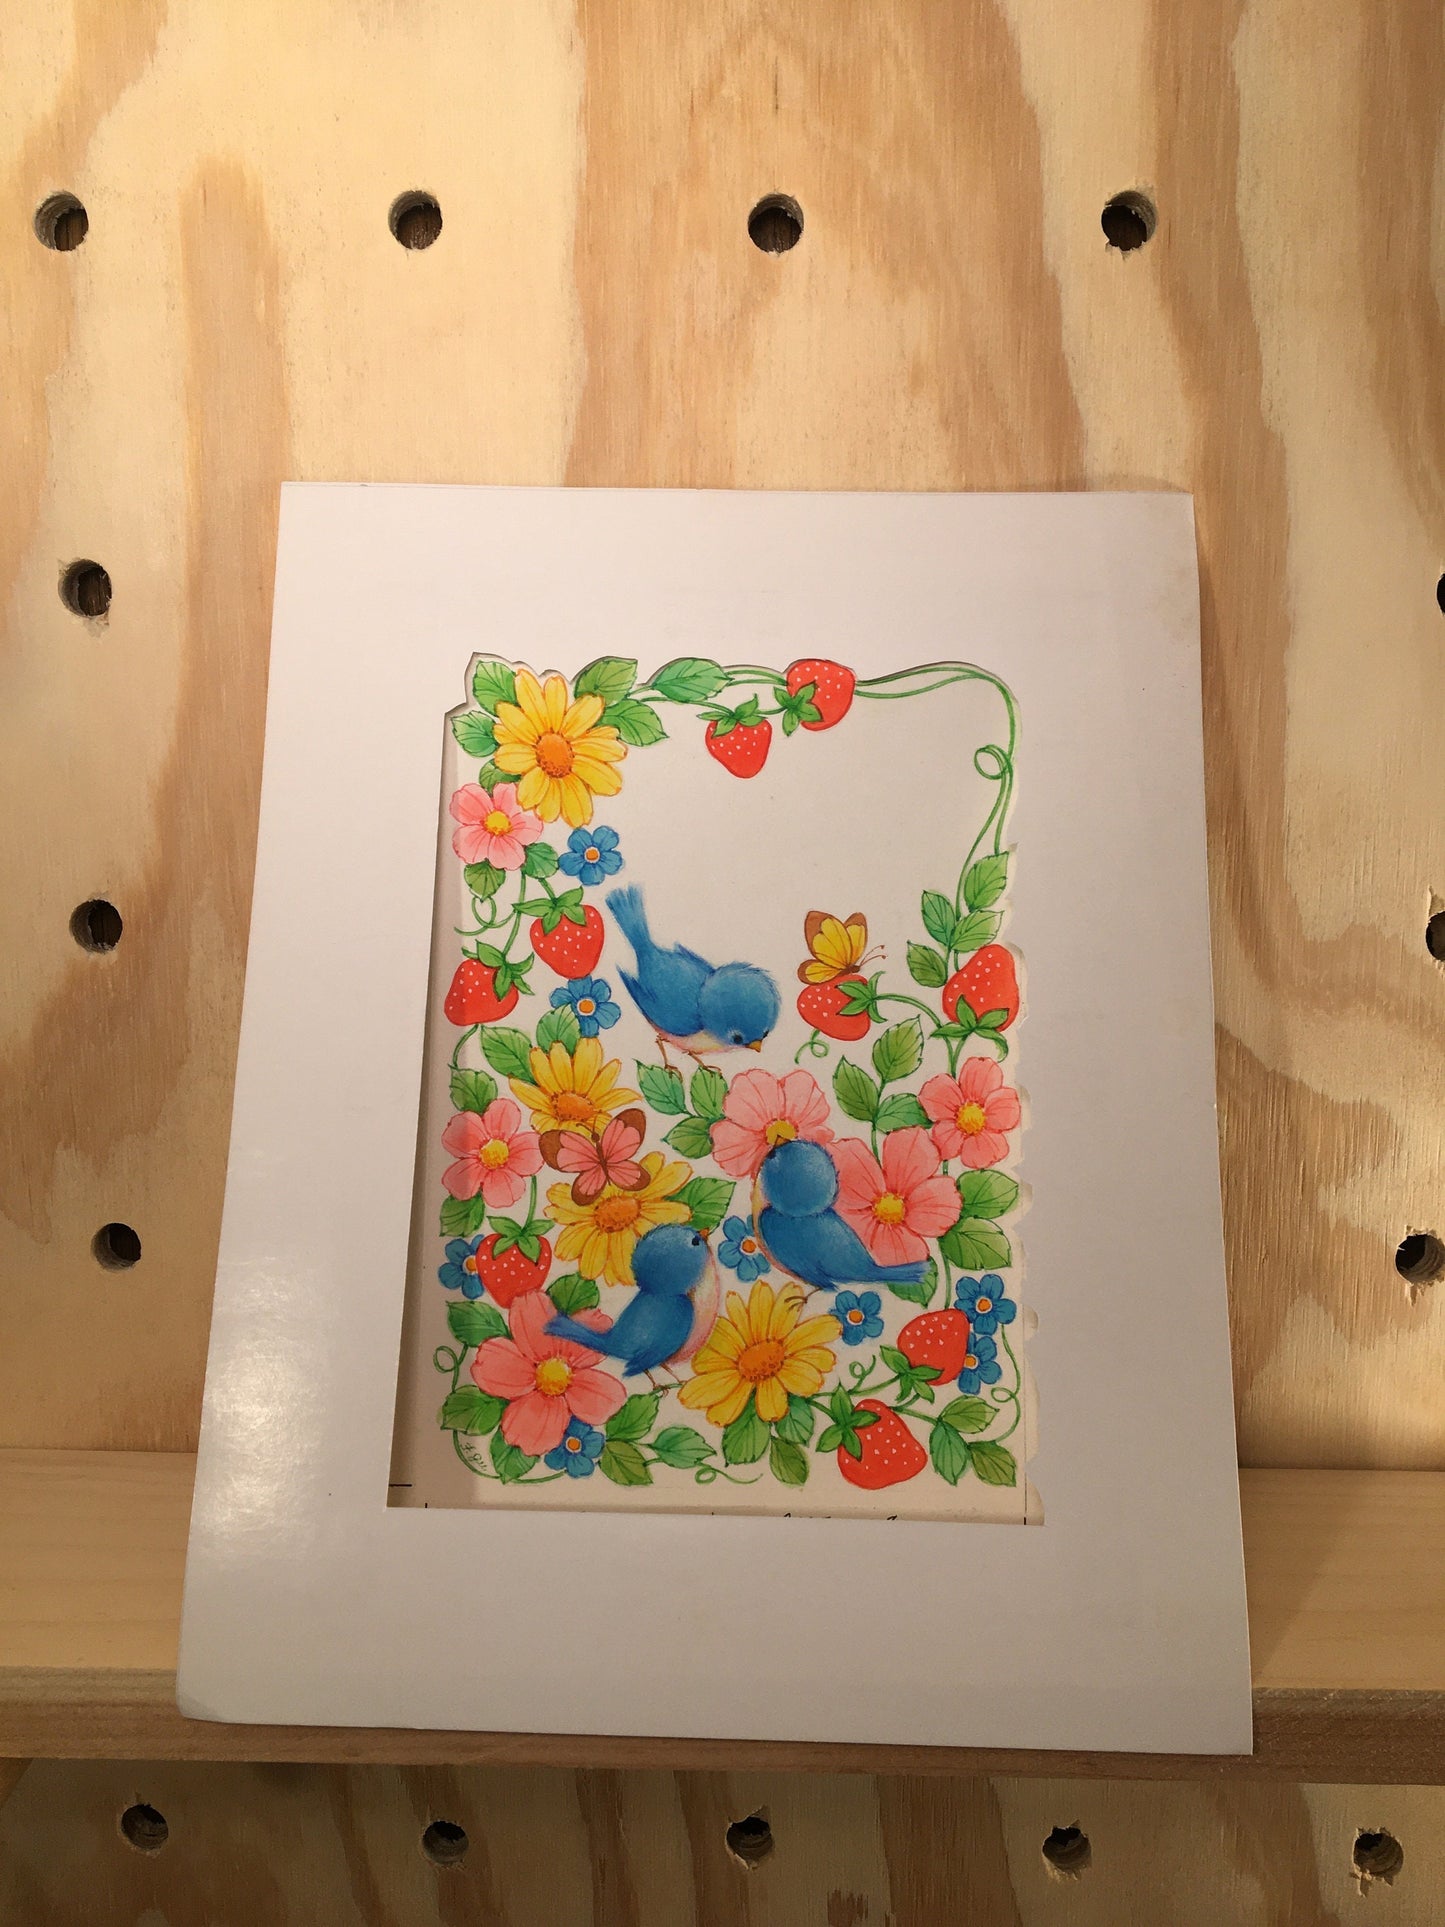 Vintage Artwork - Strawberry Patch Art with Bluebirds and Butterflies